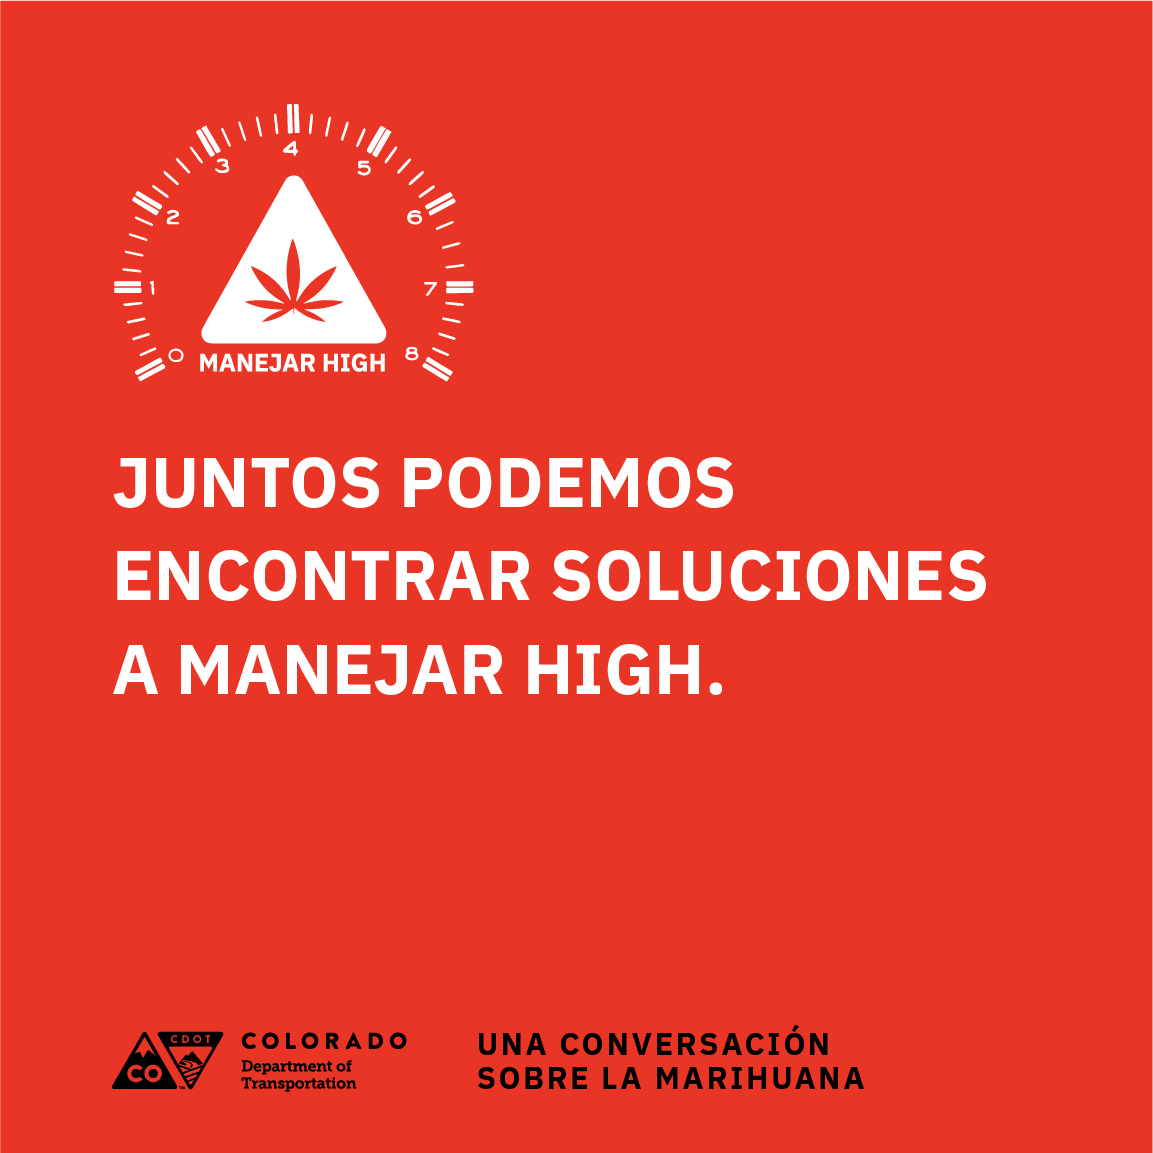 CD038_CannabisConversations_GraphicKit_Mech_v1_Spanish_Square_G.jpg detail image